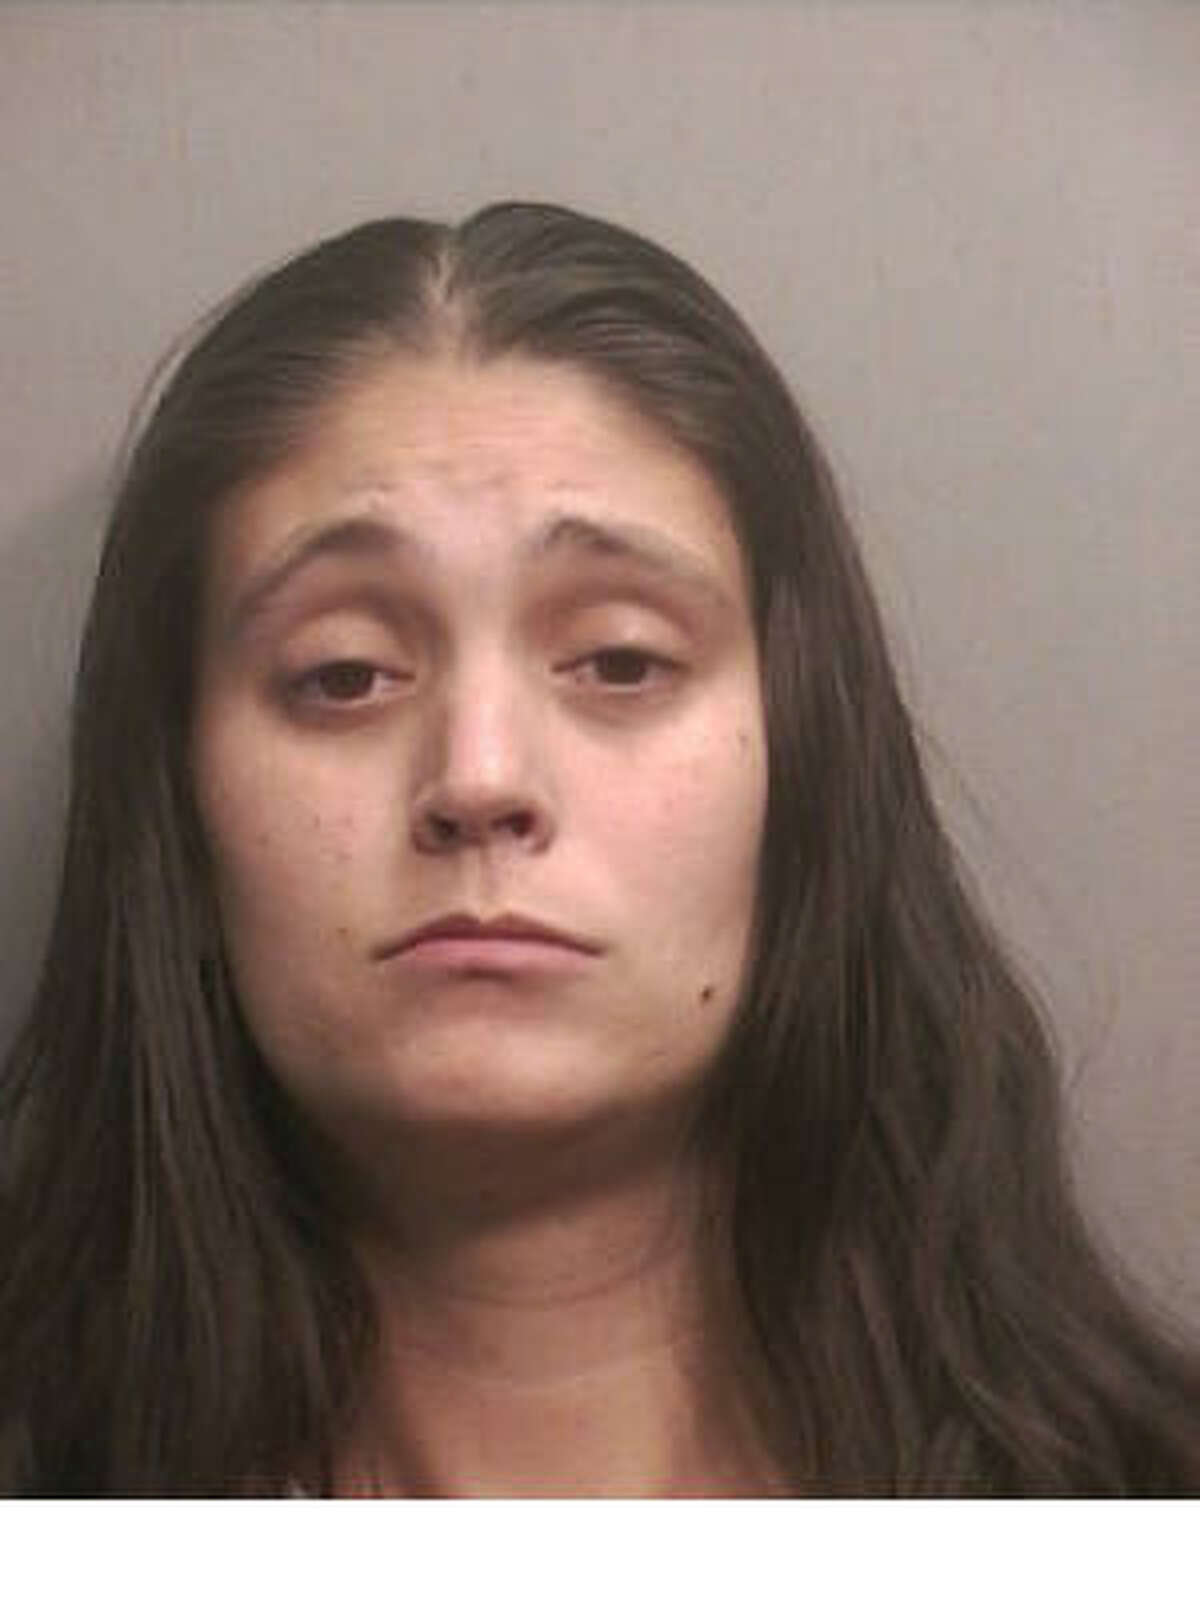 Jessica Leanne Hoosier, 26, was charged with capital murder after paramedics found her 2-month old's body last weekend.